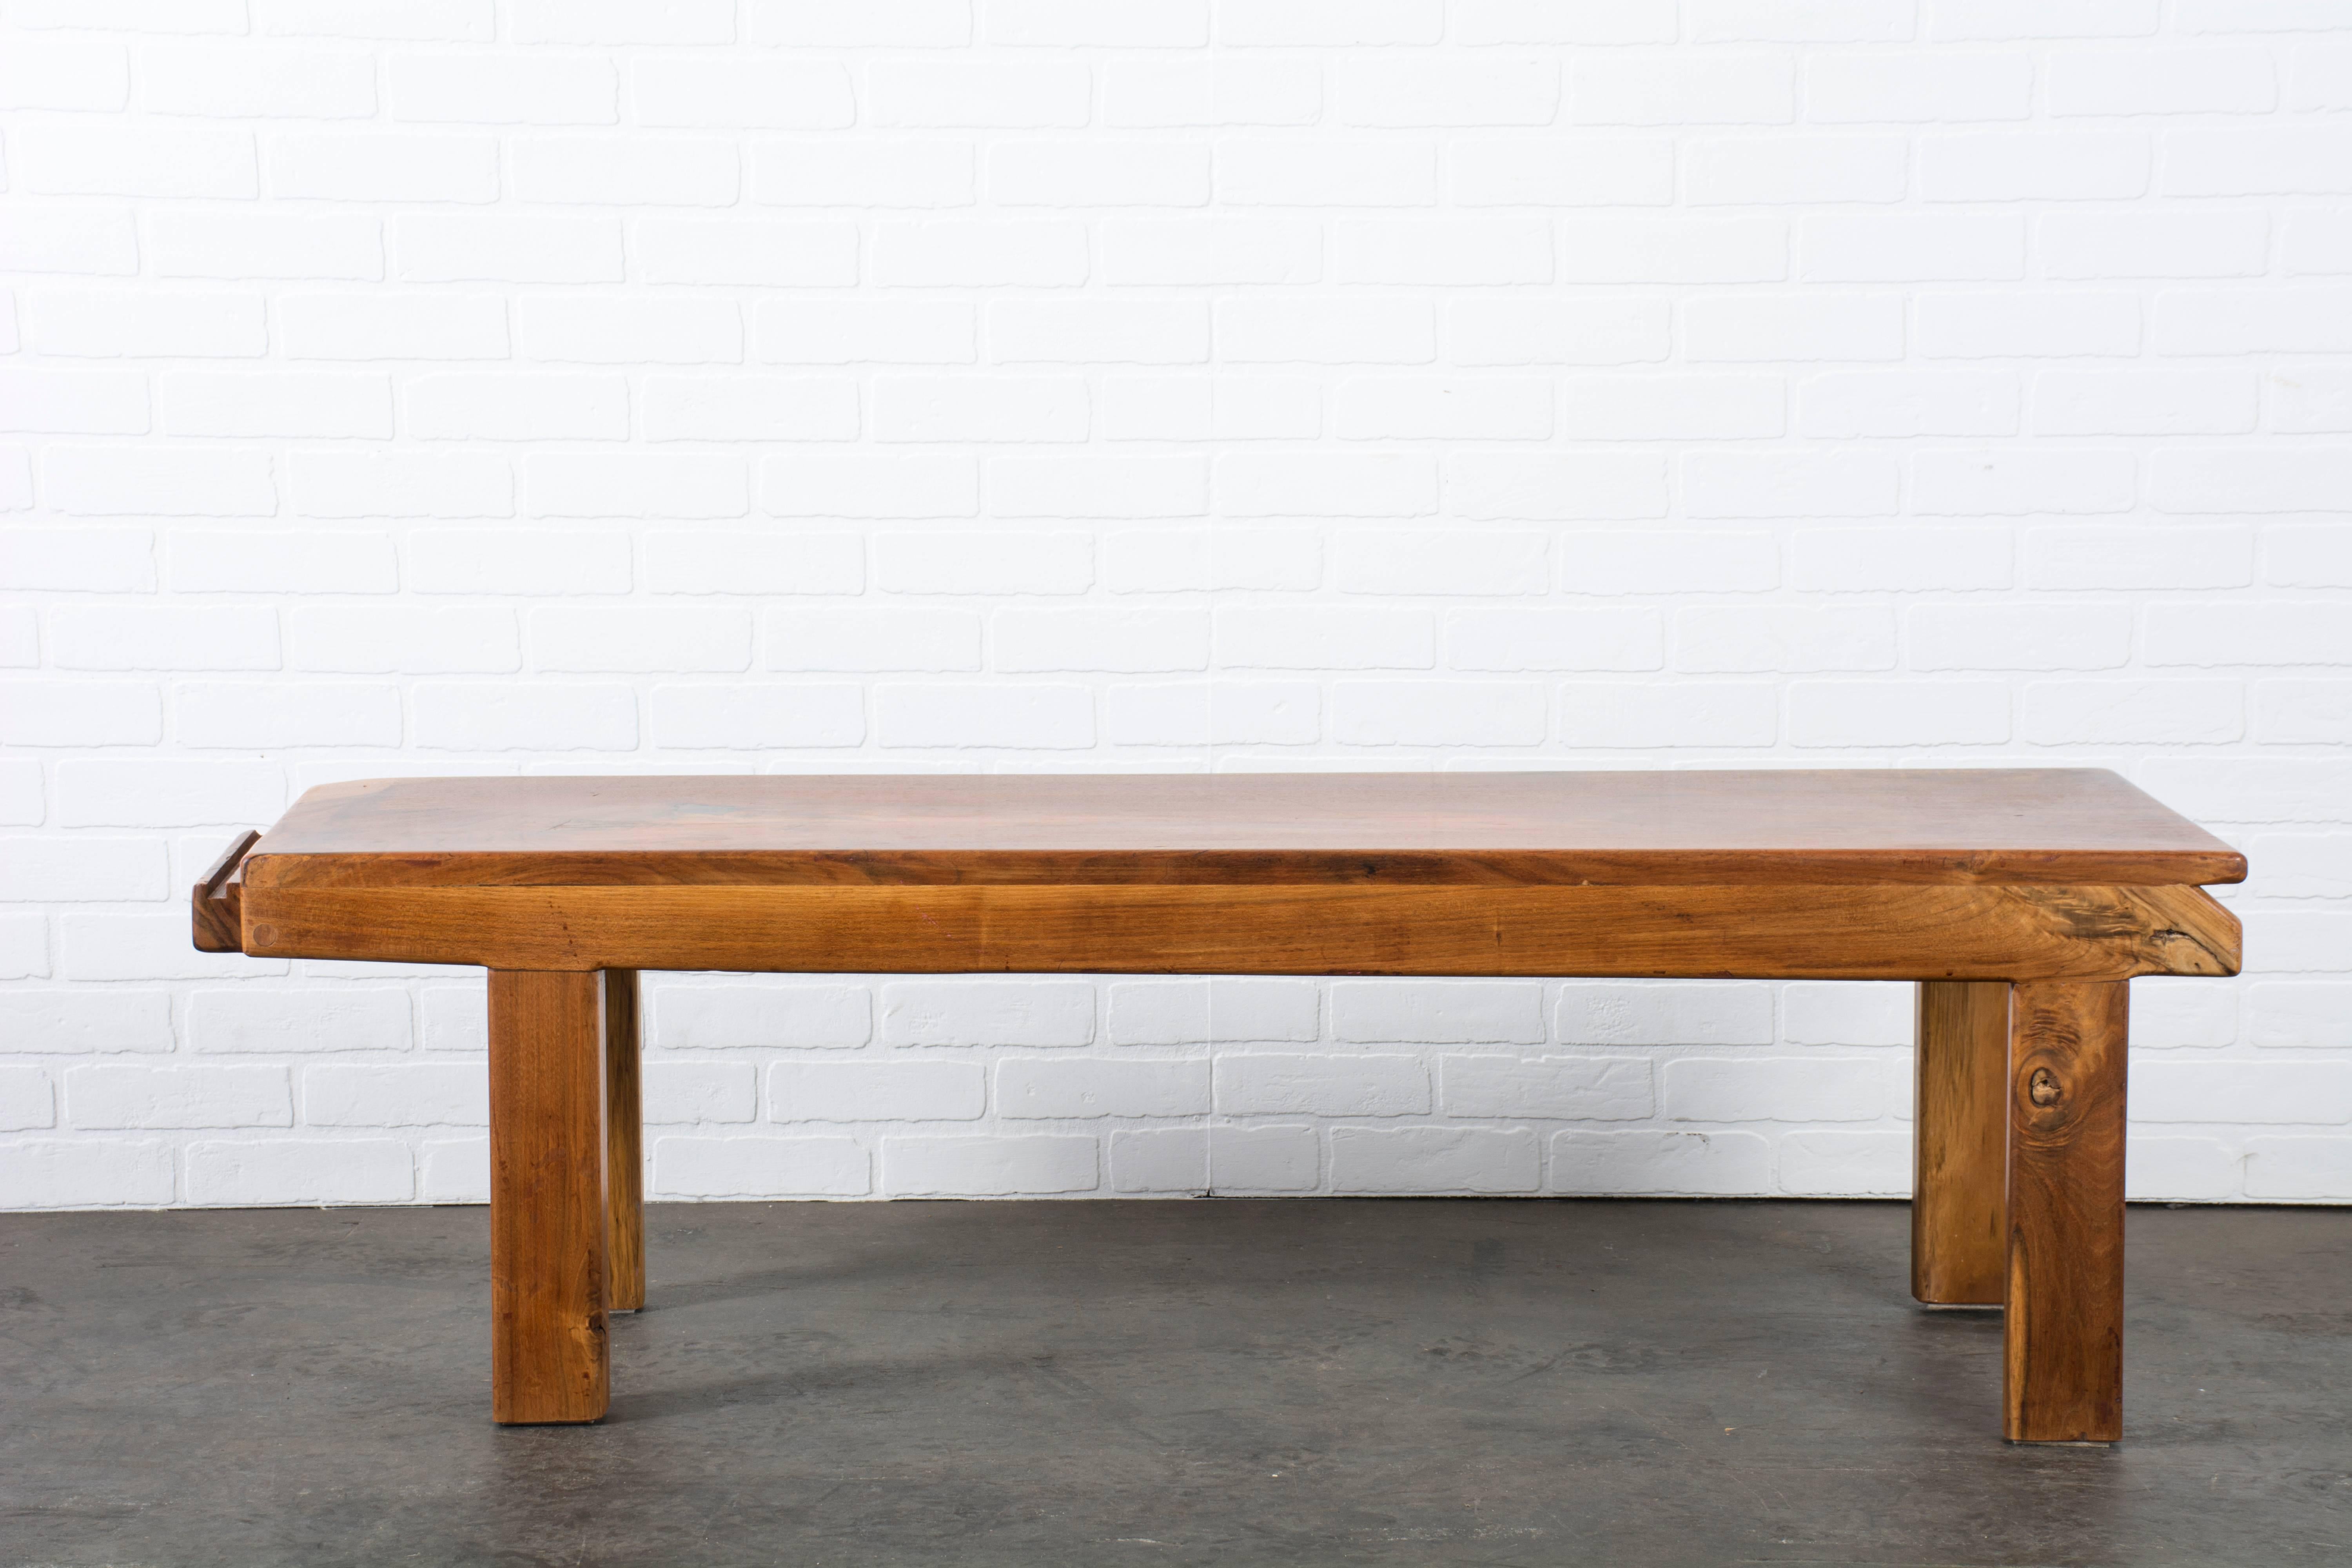 This is a vintage studio craft claro walnut bench, circa 1970s. Measurements: approximately 58.5